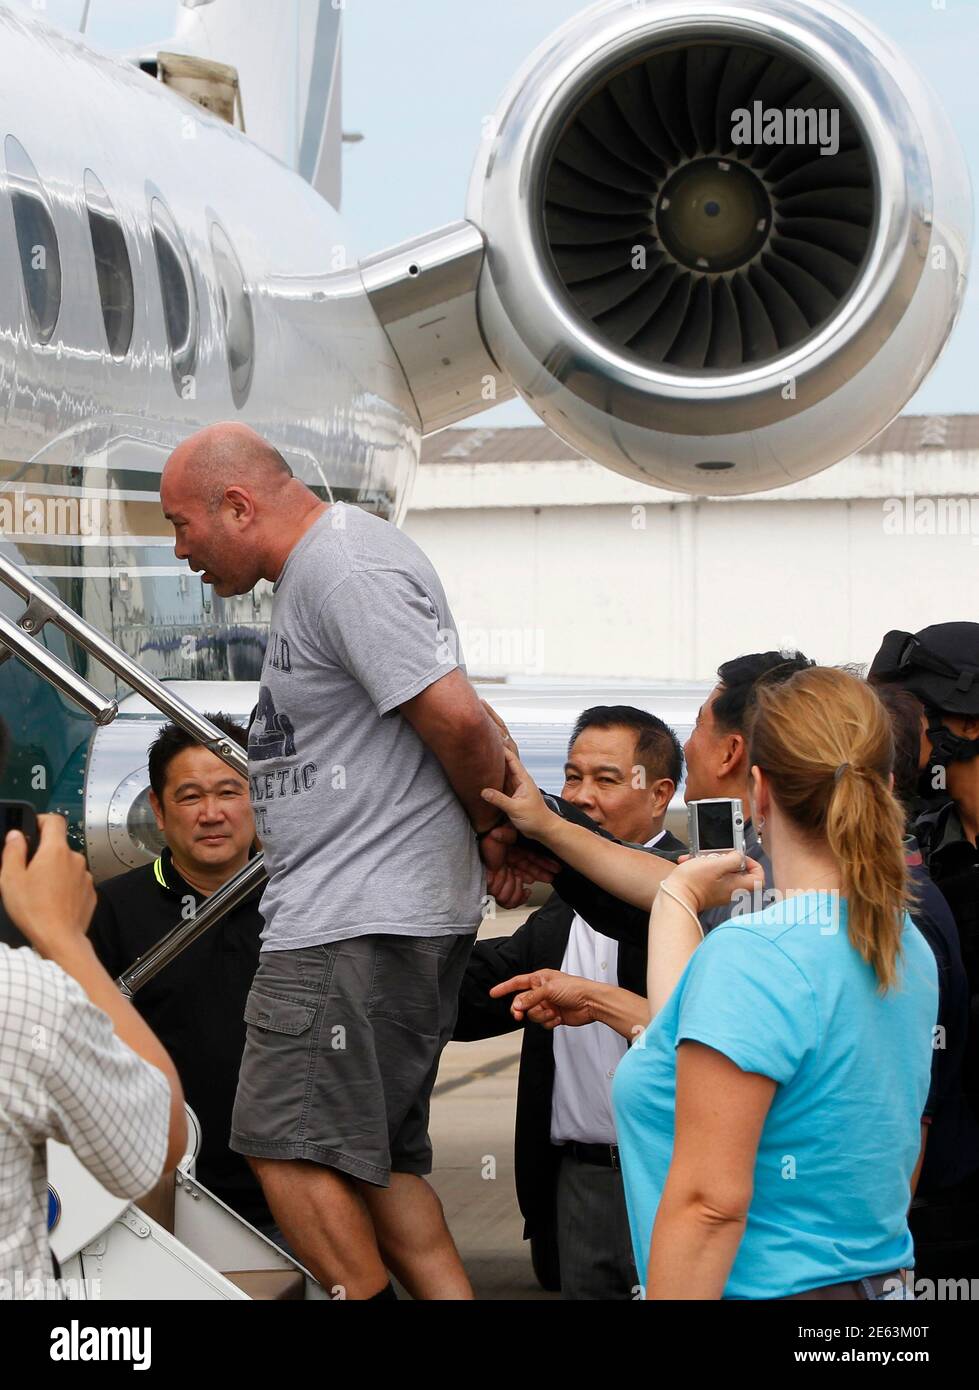 Thai policemen escort American drug suspect Joseph Hunter, 48, as he boards a charter flight at Don Mueang International Airport in Bangkok September 27, 2013. Thai police transferred six foreigners suspected of drug smuggling to Bangkok on Thursday after their arrests in the seaside resort, Phuket. Hunter, along with two British, a Taiwanese, a Slovak, and a Filipino were arrested on Phuket island on Wednesday following a tip-off from the United States Drug Enforcement Administration (DEA). REUTERS/Chaiwat Subprasom (THAILAND - Tags: CRIME LAW DRUGS SOCIETY) Stock Photo